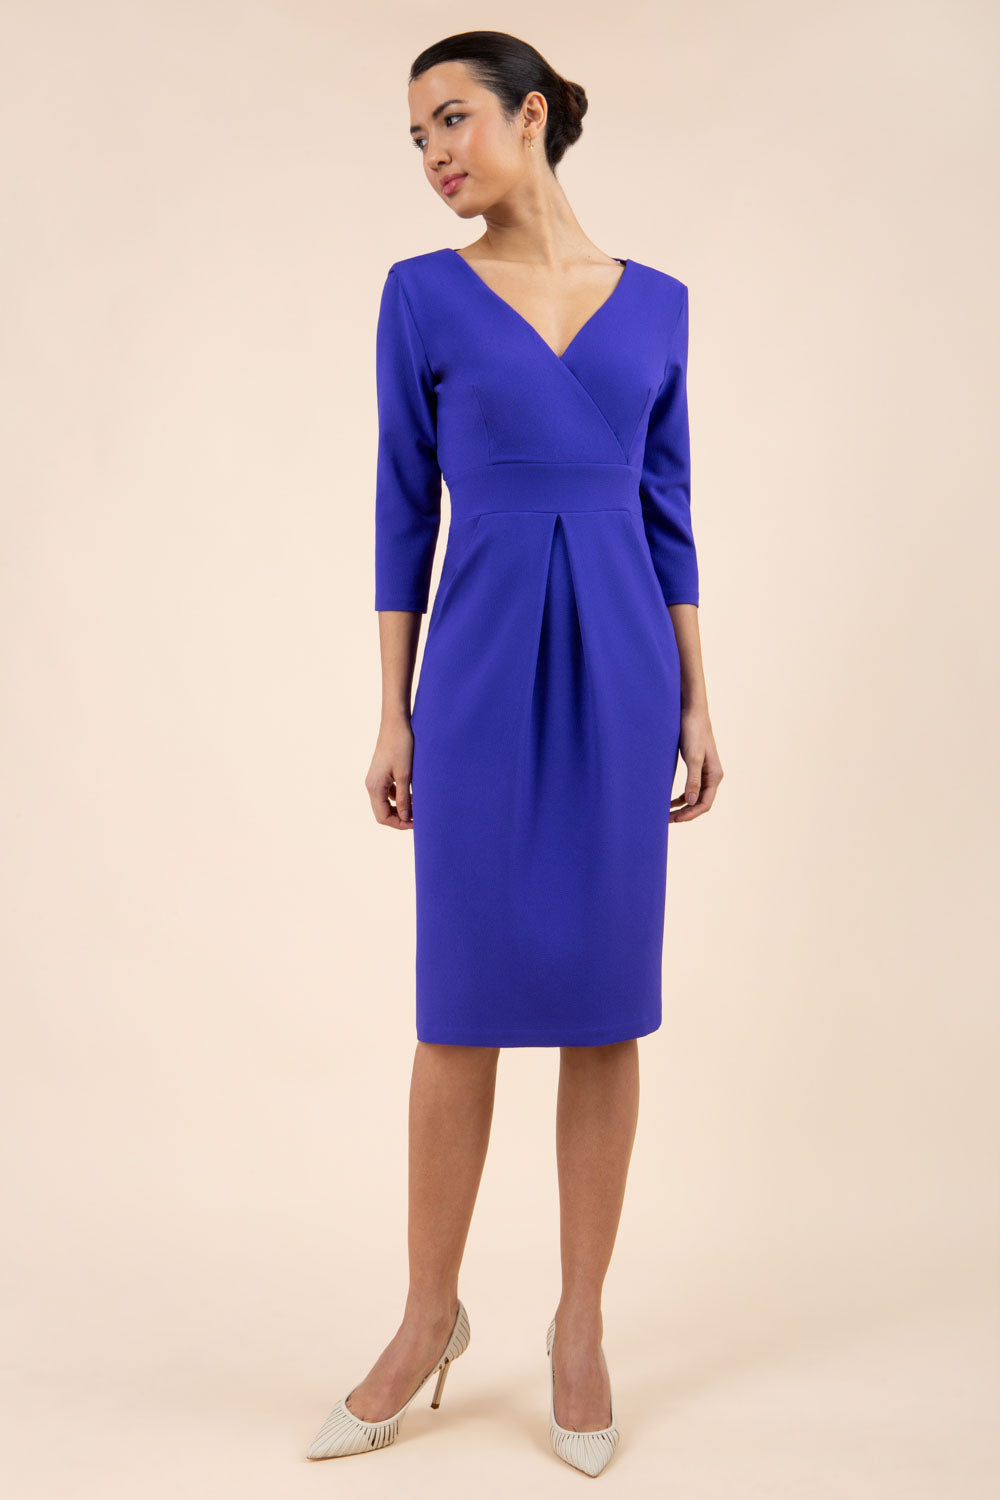 Wimpole Low N-Neck Sleeved Dress